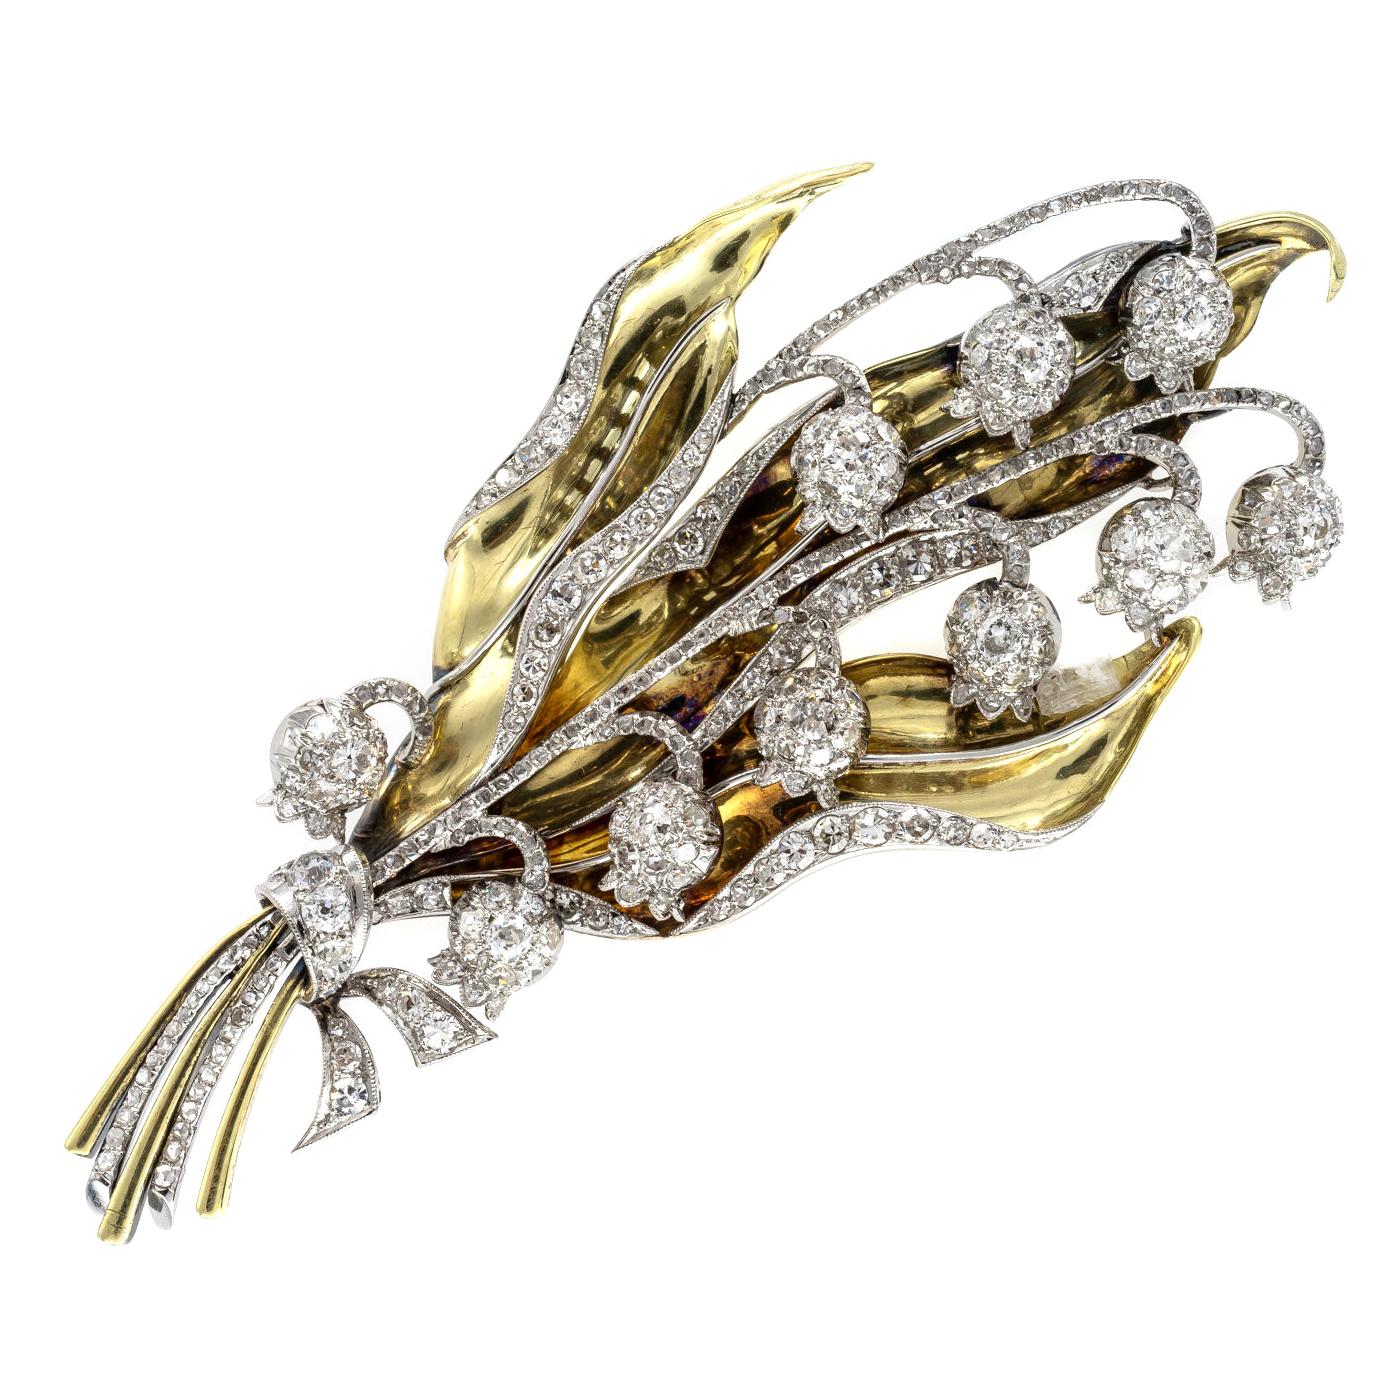 Diamond and Gold Lily of the Valley Brooch, Circa 1940